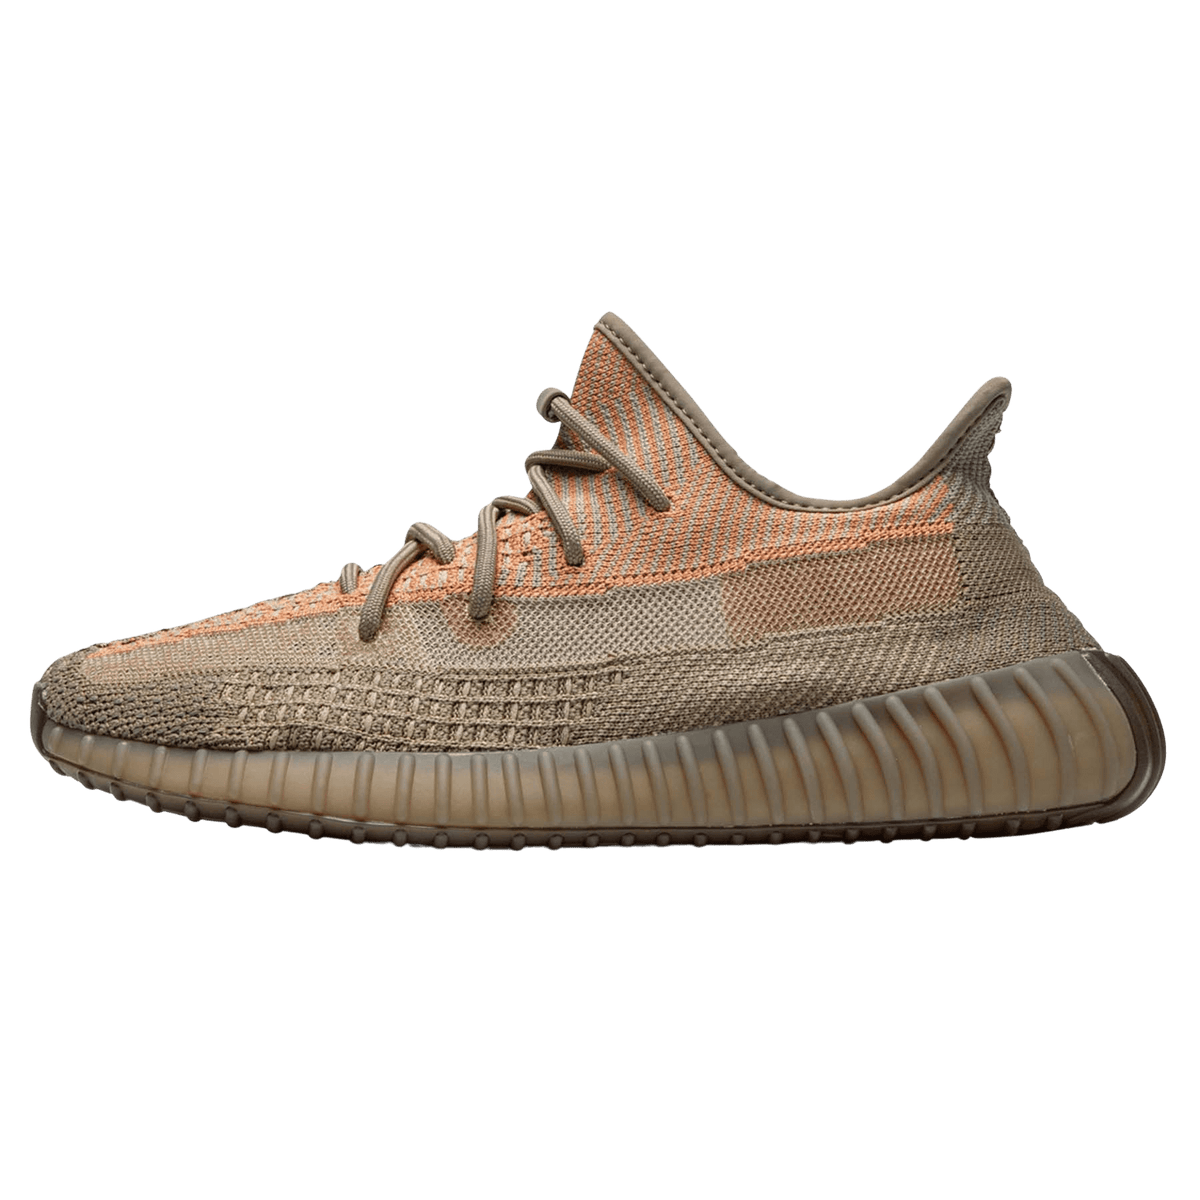 adidas bags yeezy boost 350 v2 sand taupe fz5240 1